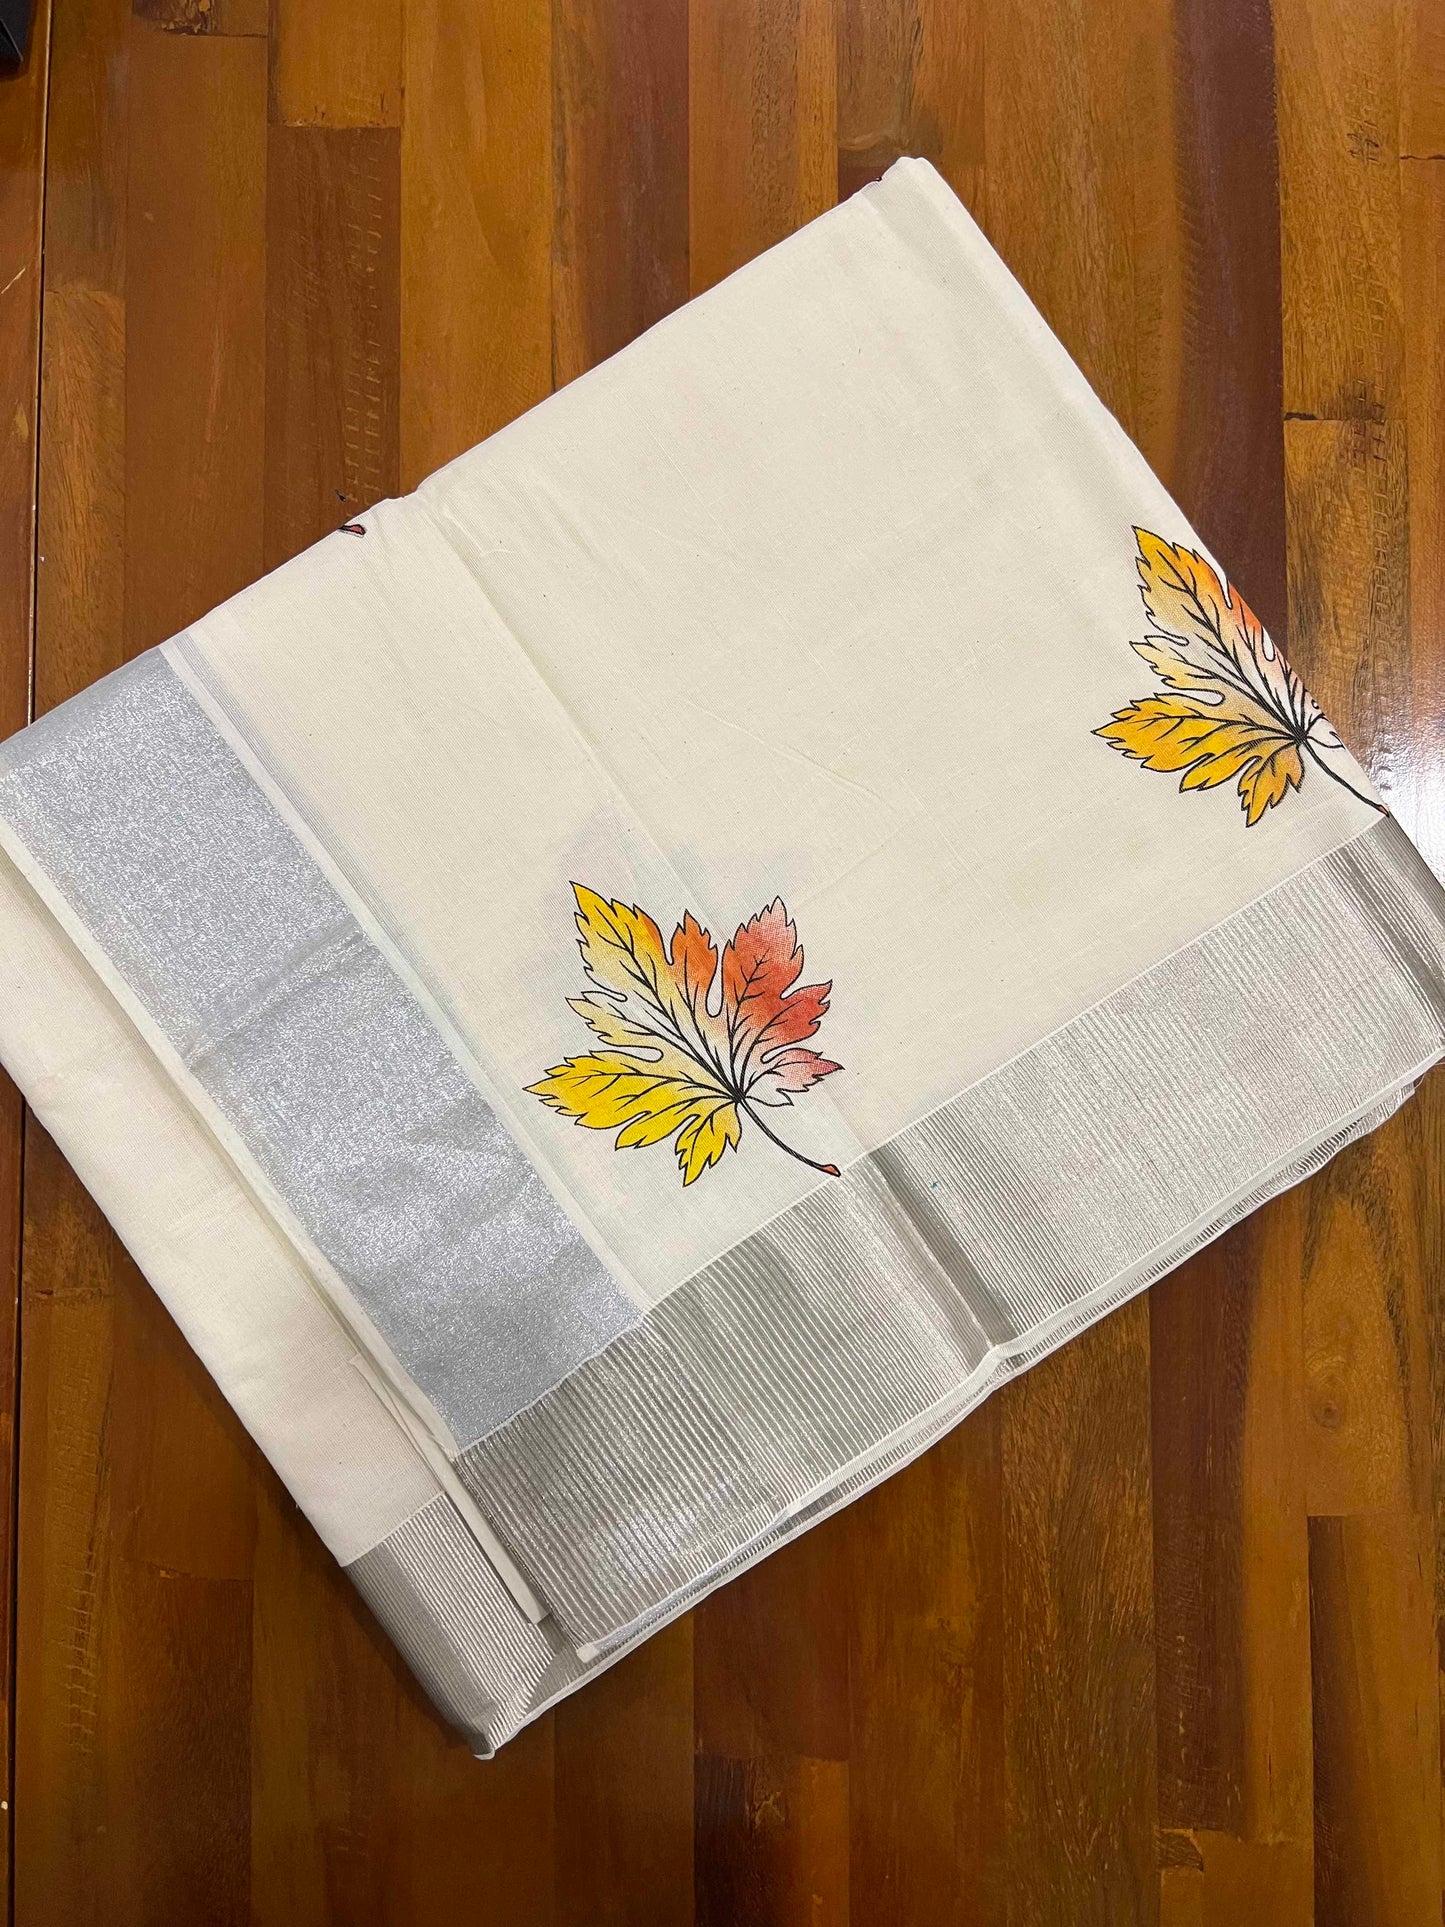 Off White Pure Cotton Kerala Saree with Leaf Mural Prints and Silver Kasavu Border